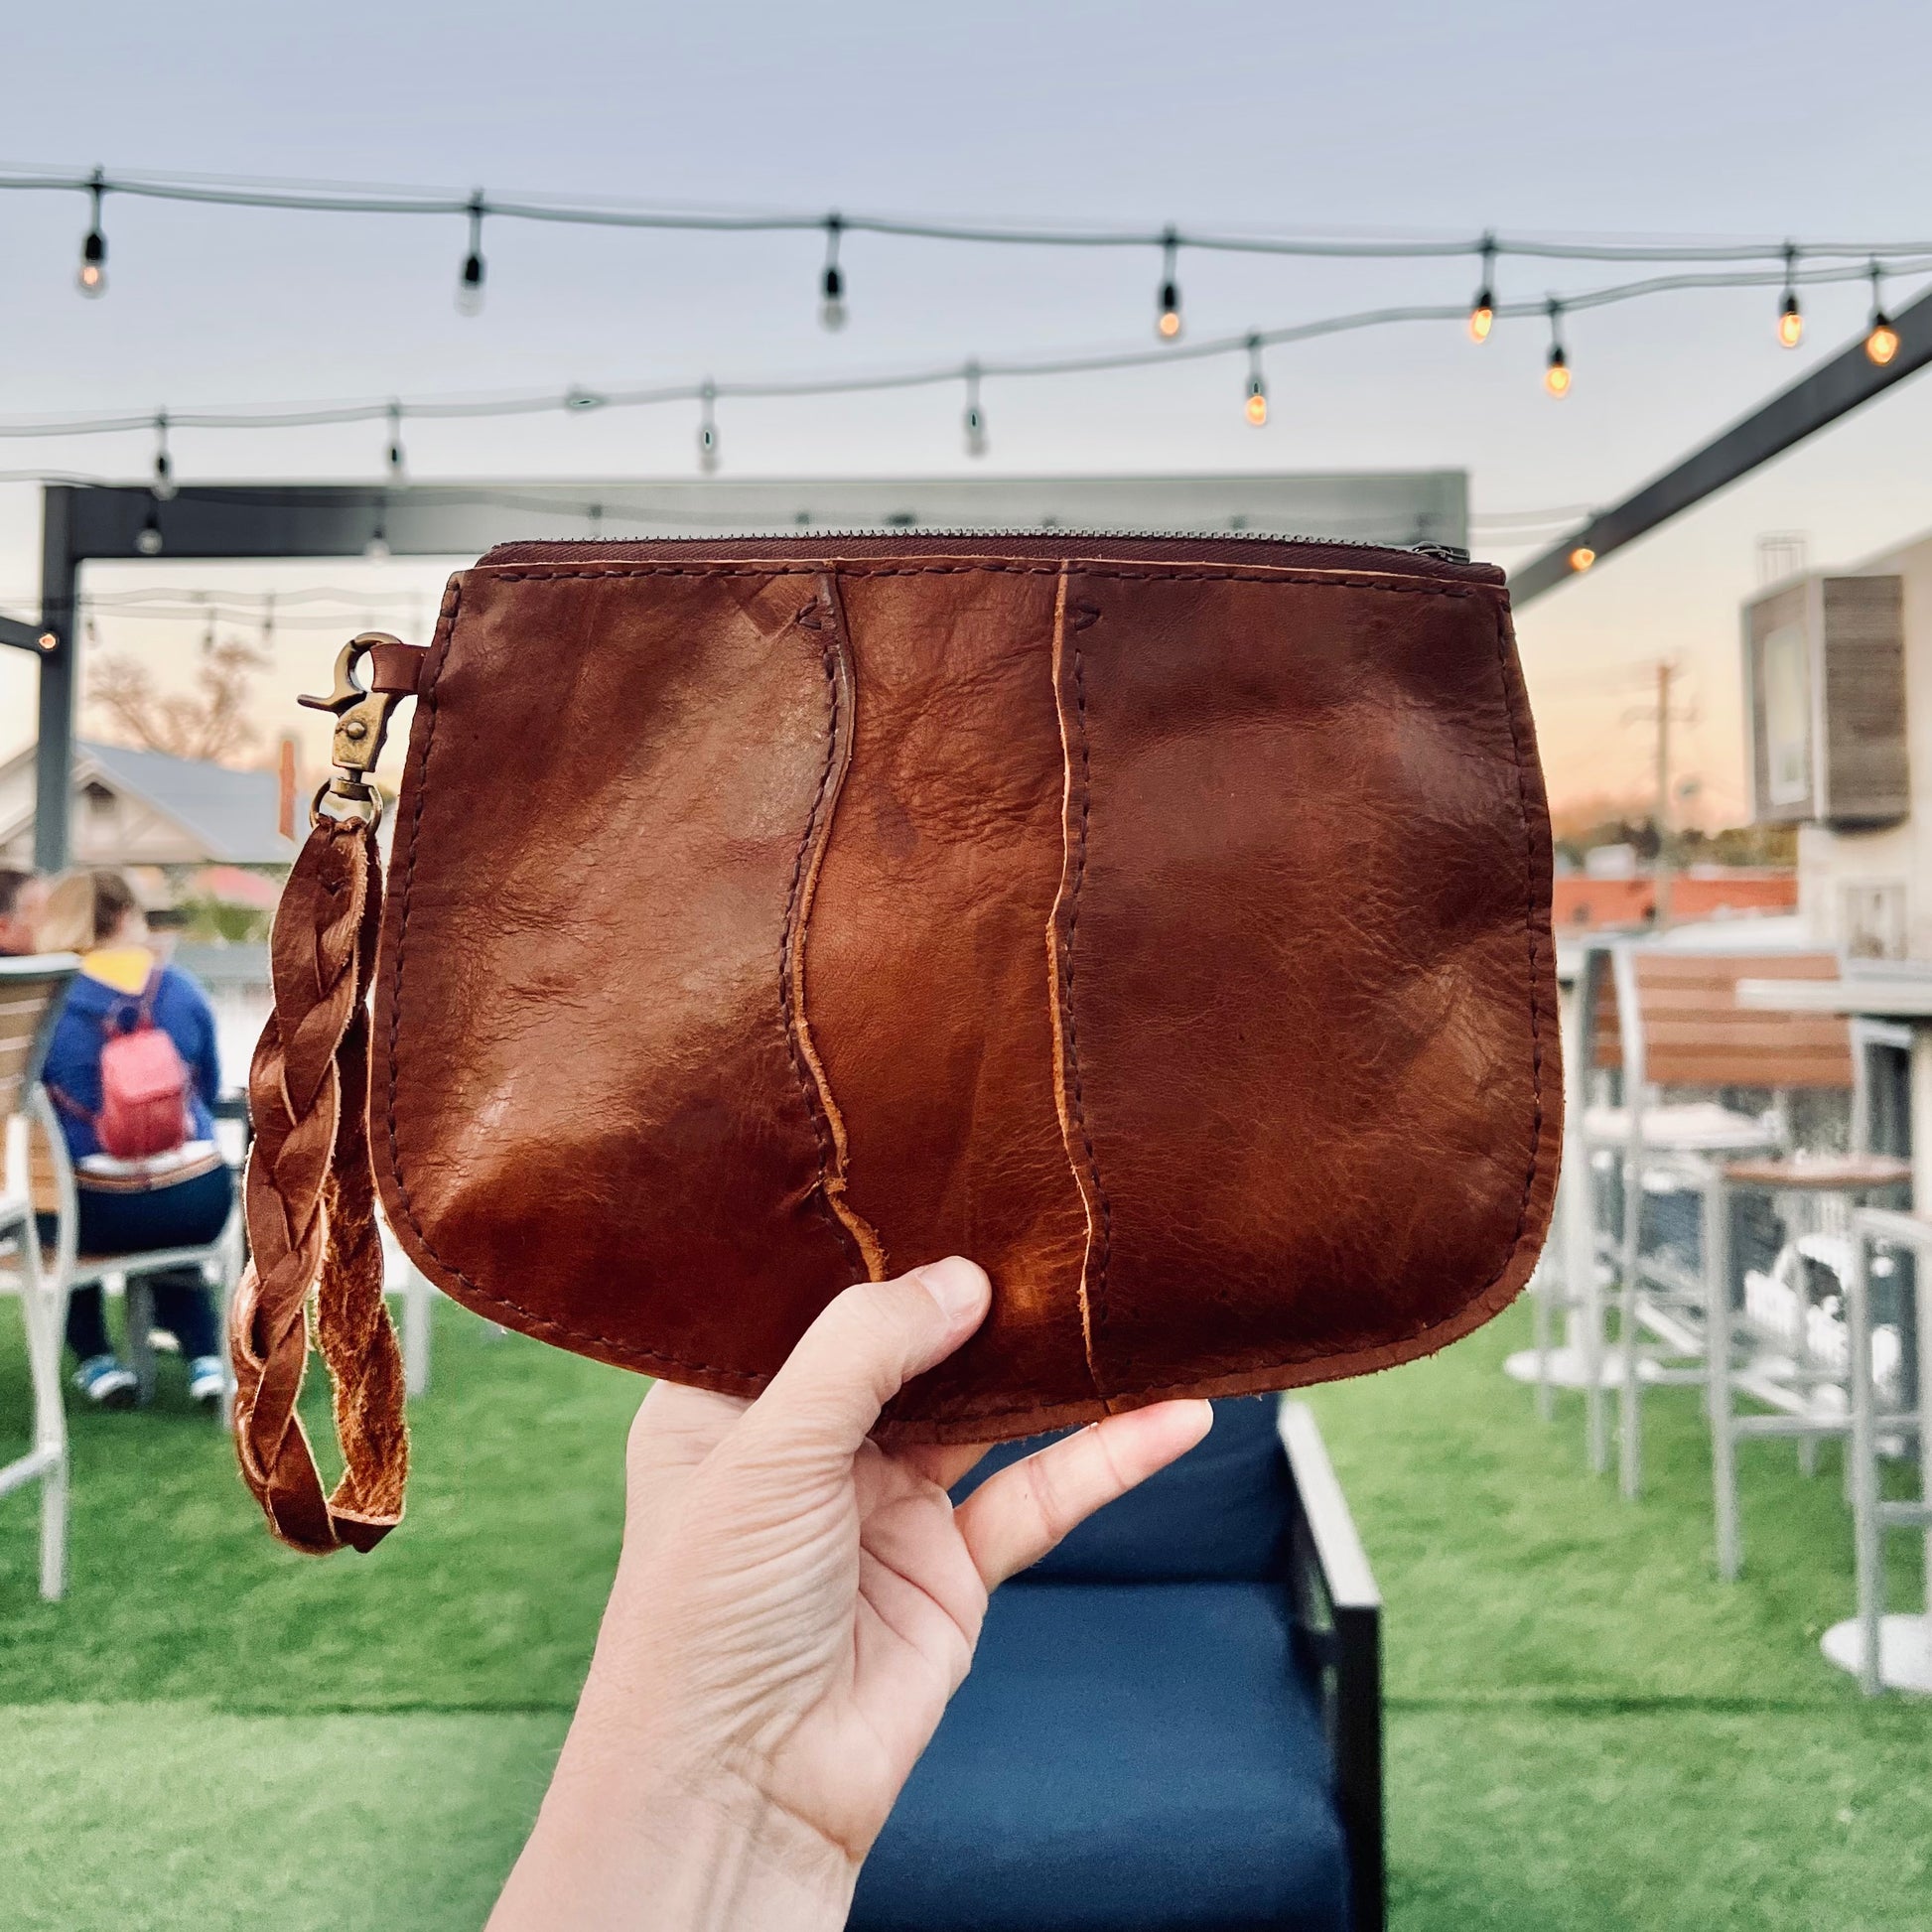 1974 Broad River Leather Wristlet hanging out in Starland Yard, Savannah